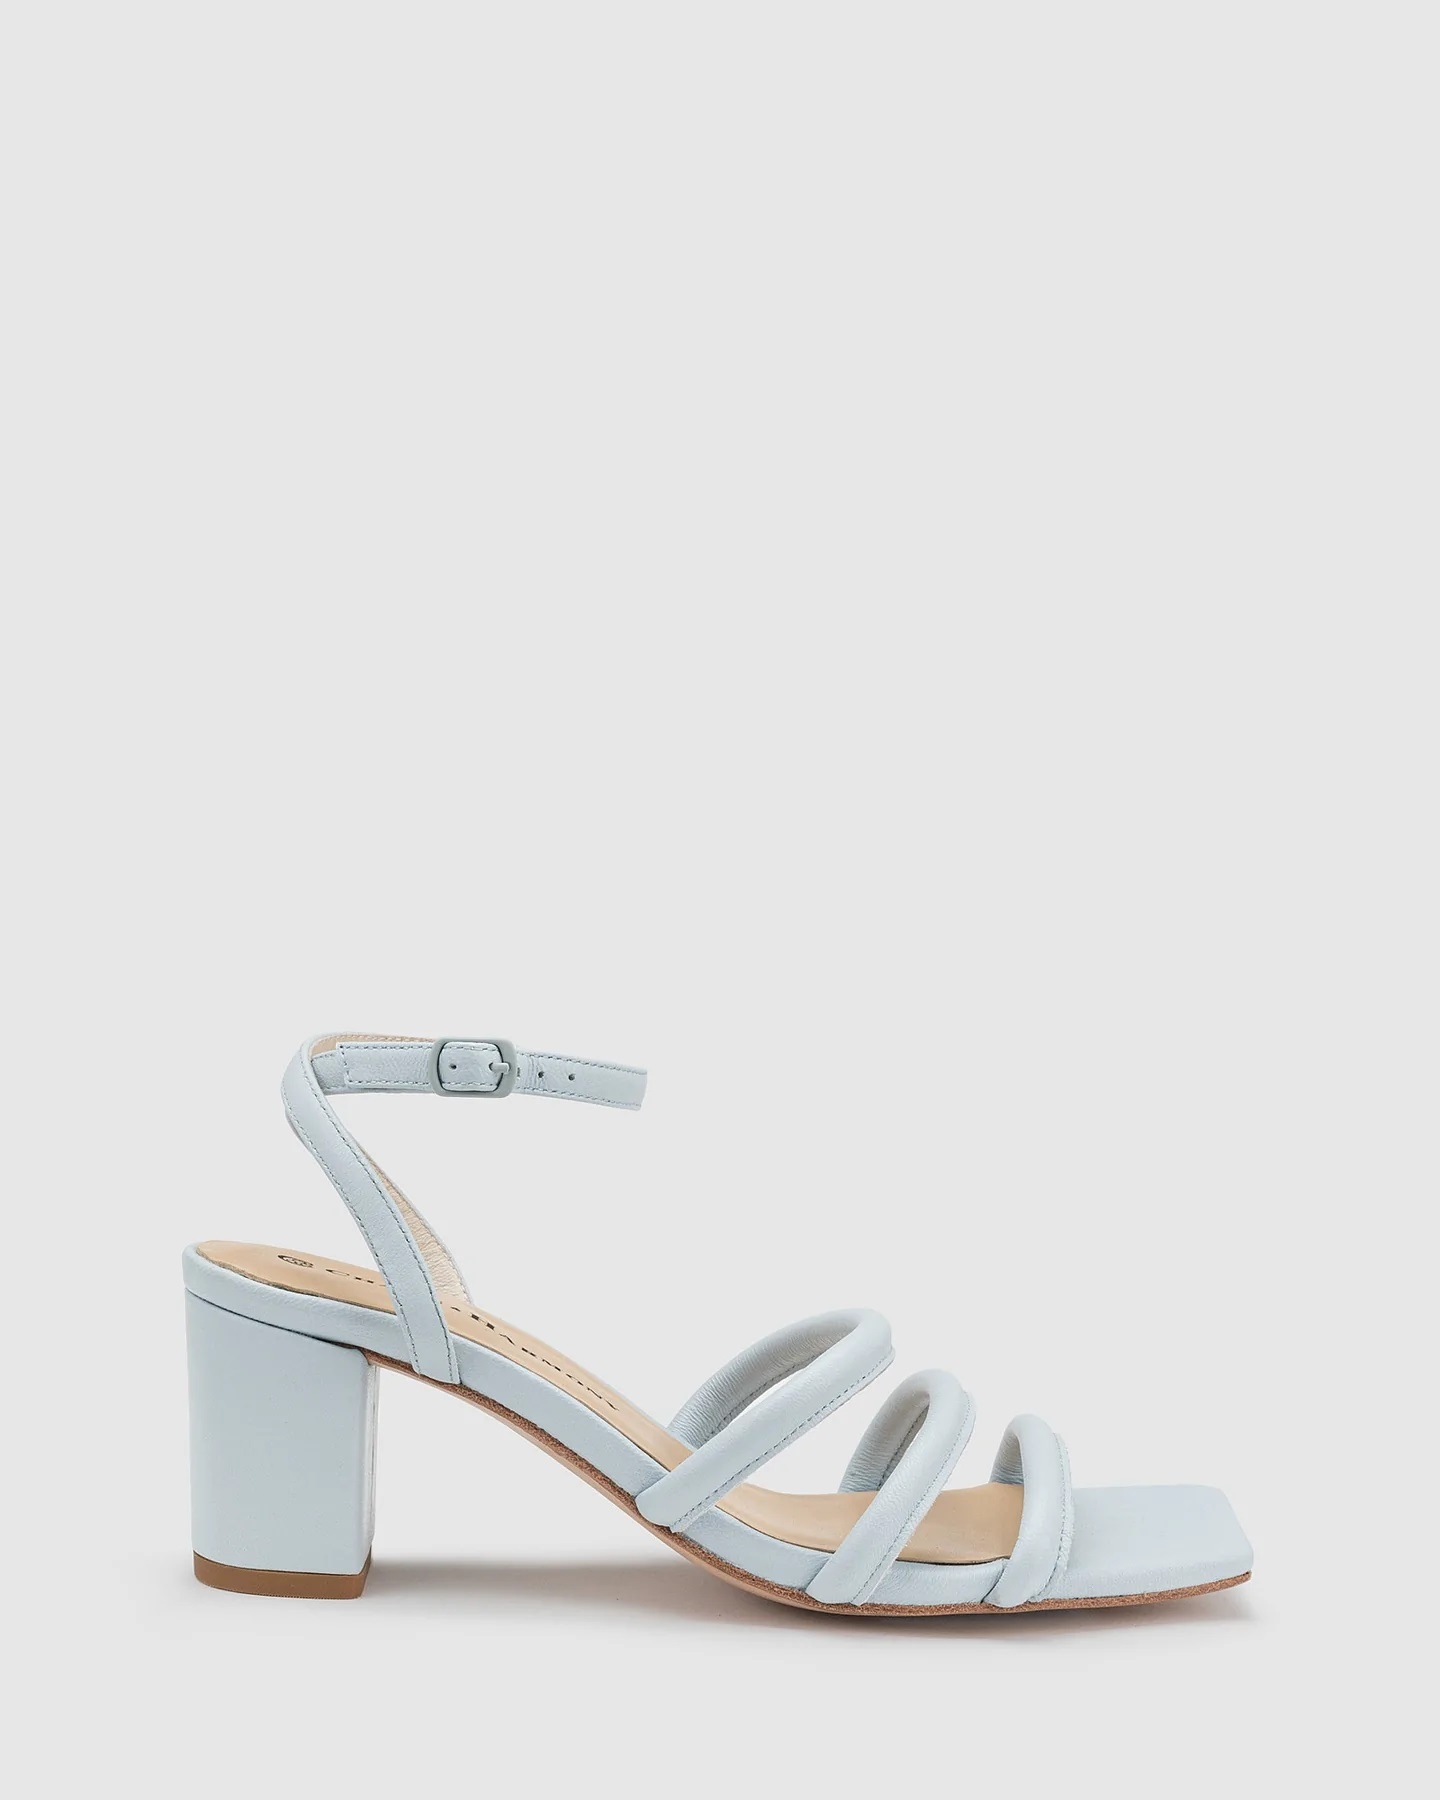 Swoon bridal heels in Powder Blue | Hera Couture